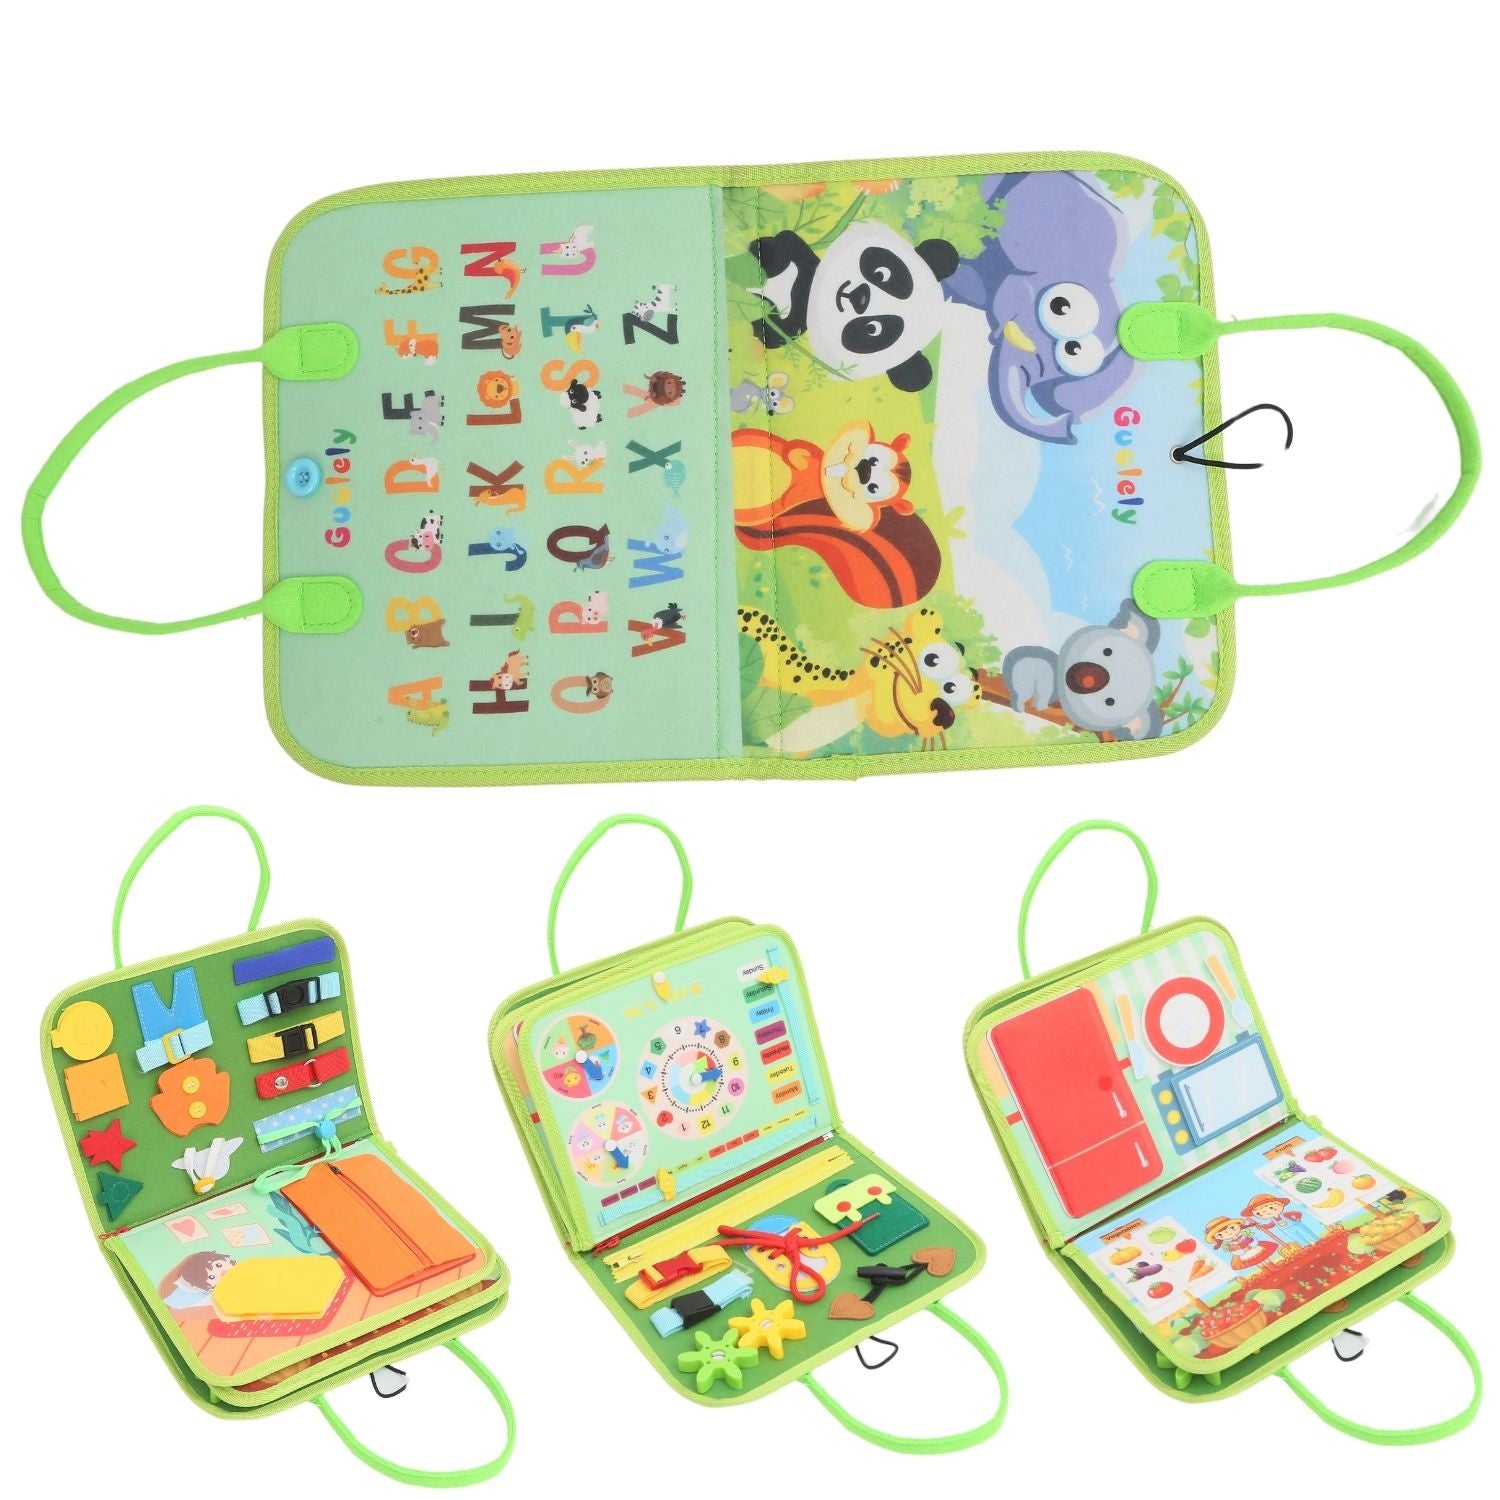 GOMINIMO Kids Busy Board Learning Toys (Green)